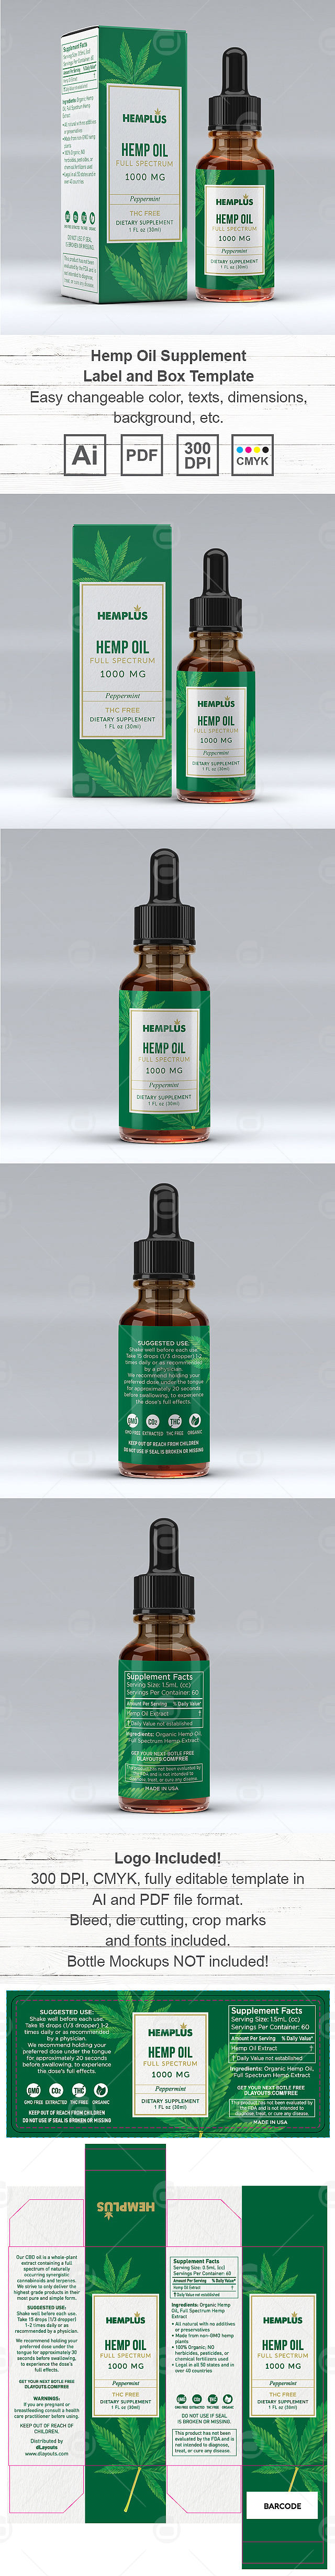 Hemp Oil Supplement Label and Box Template